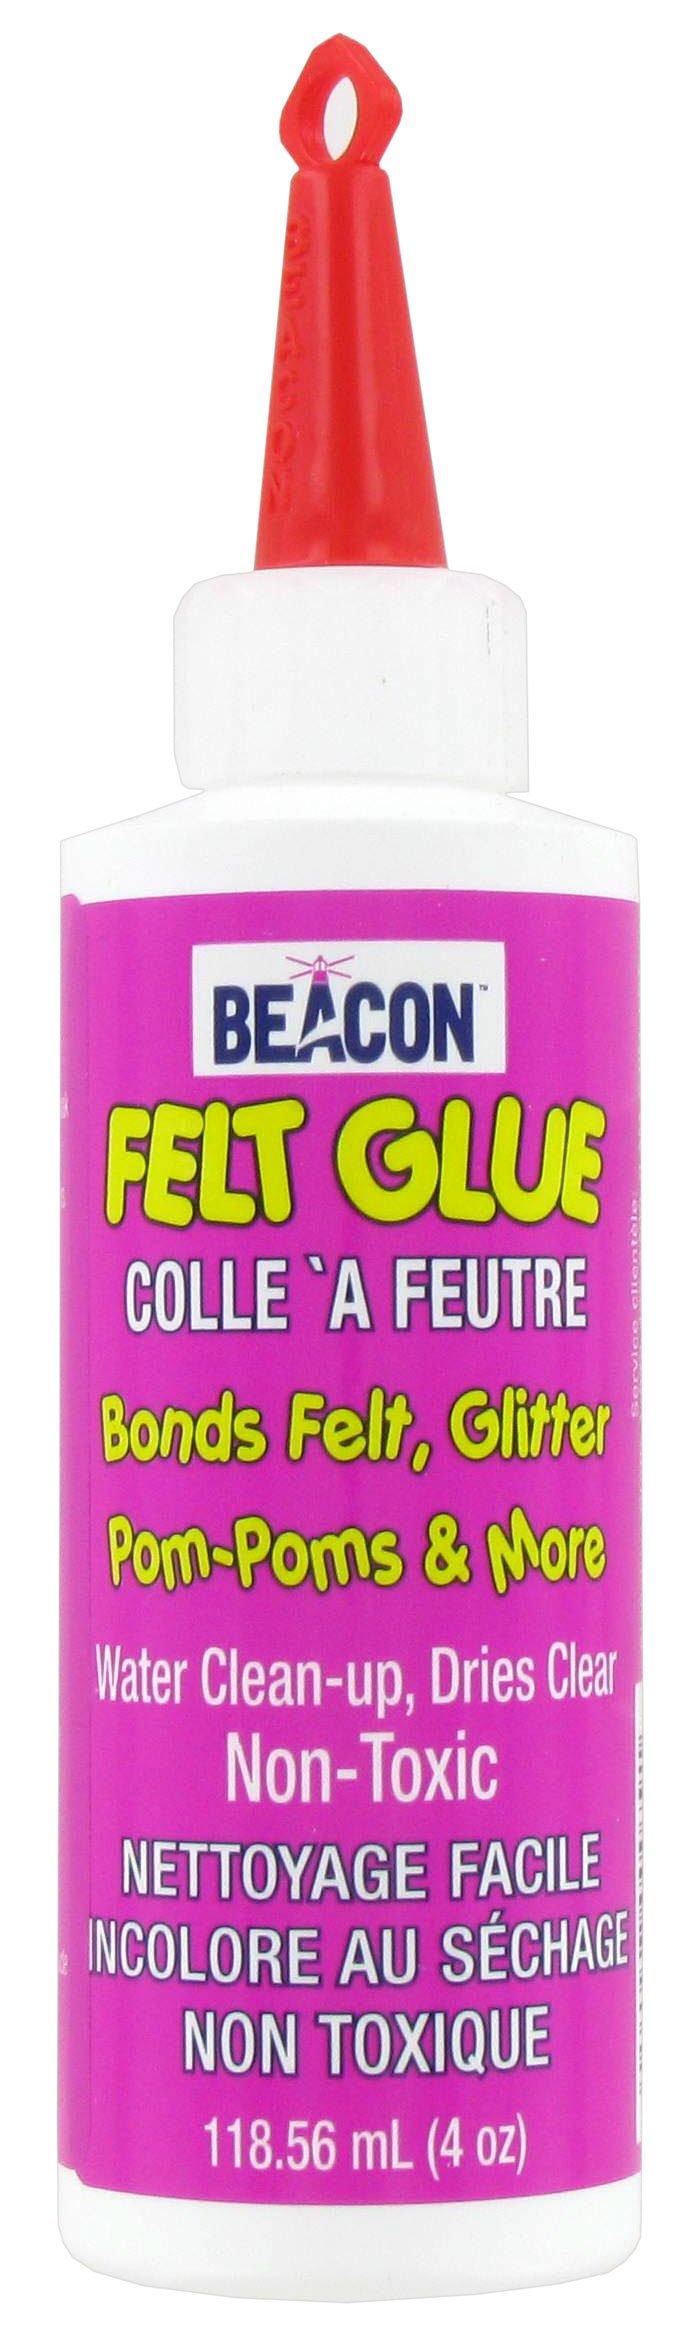  BEACON Felt Glue - Fast Fix for All Felt Projects, Non-Toxic,  Dries Clear, Great for Kids, Washer-Friendly, 4-Ounce